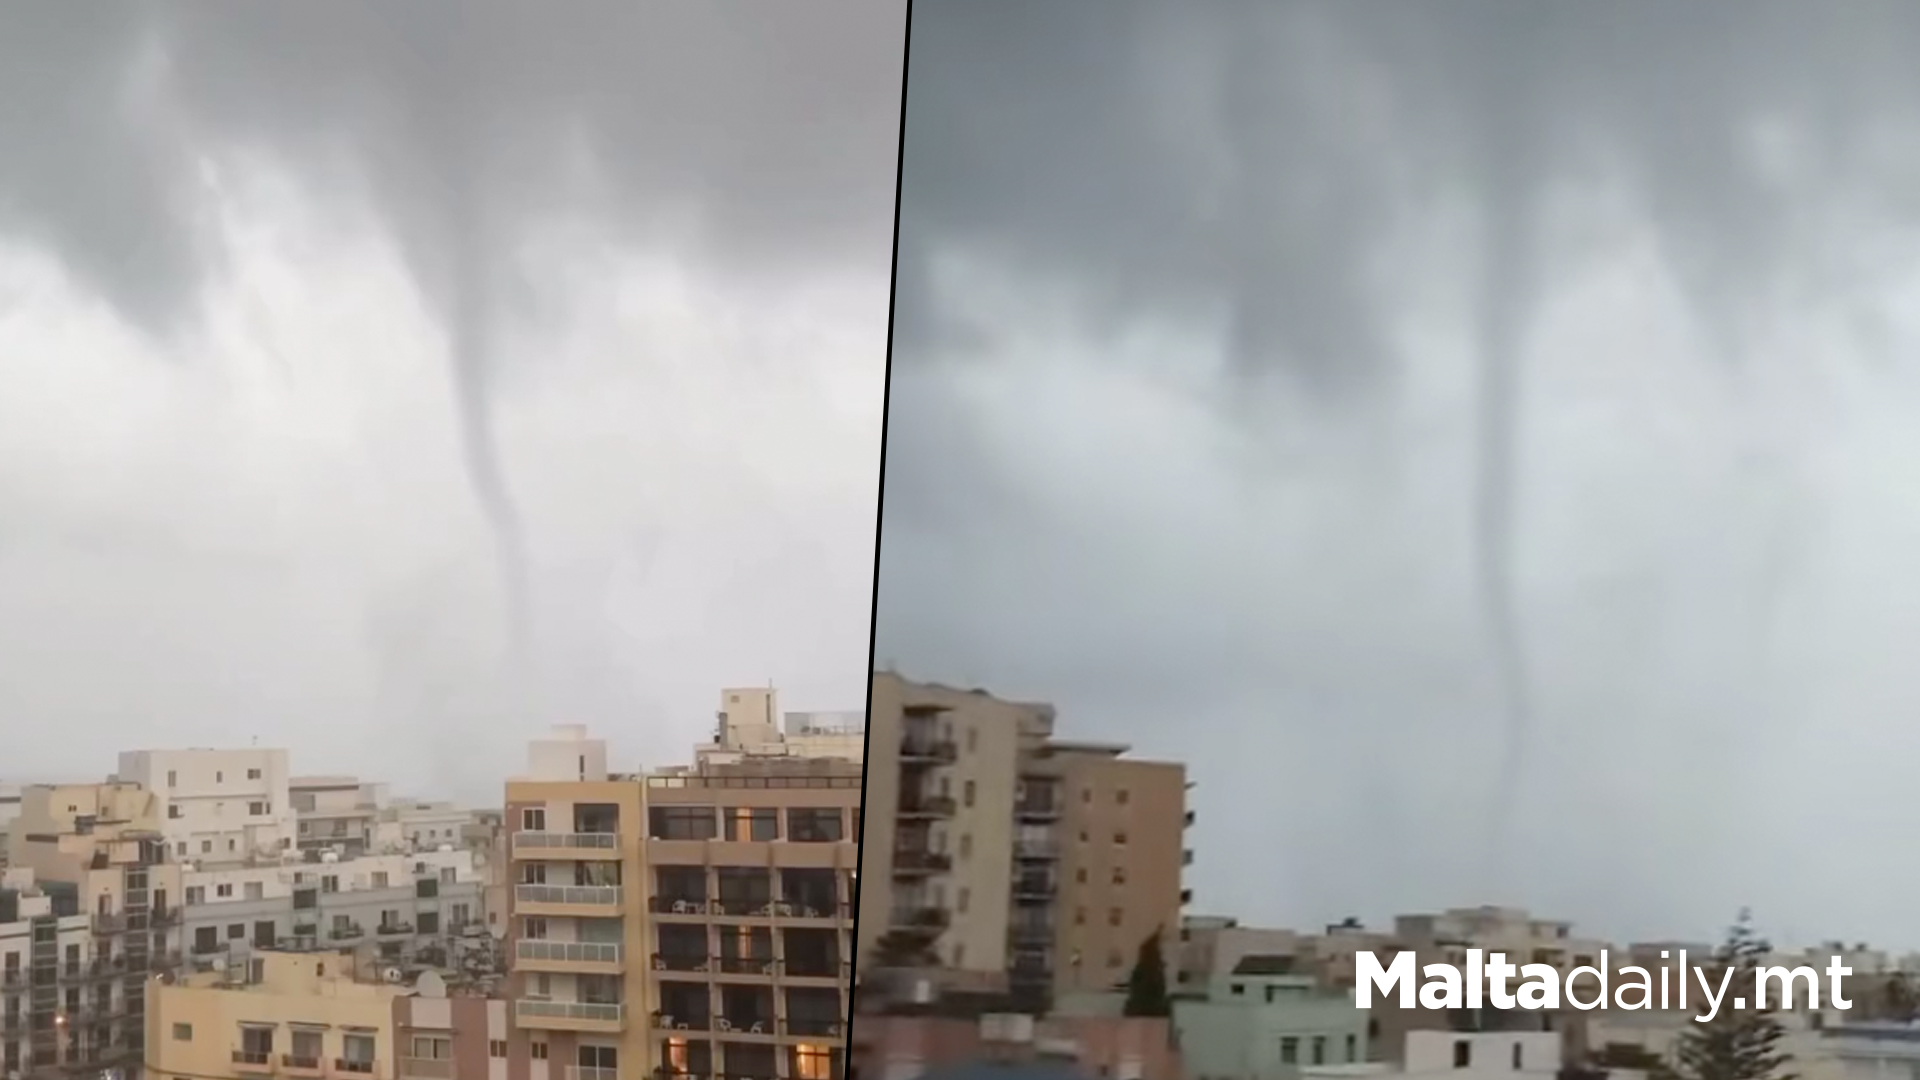 Tornado Spotted In Qawra During Yesterday's Storm